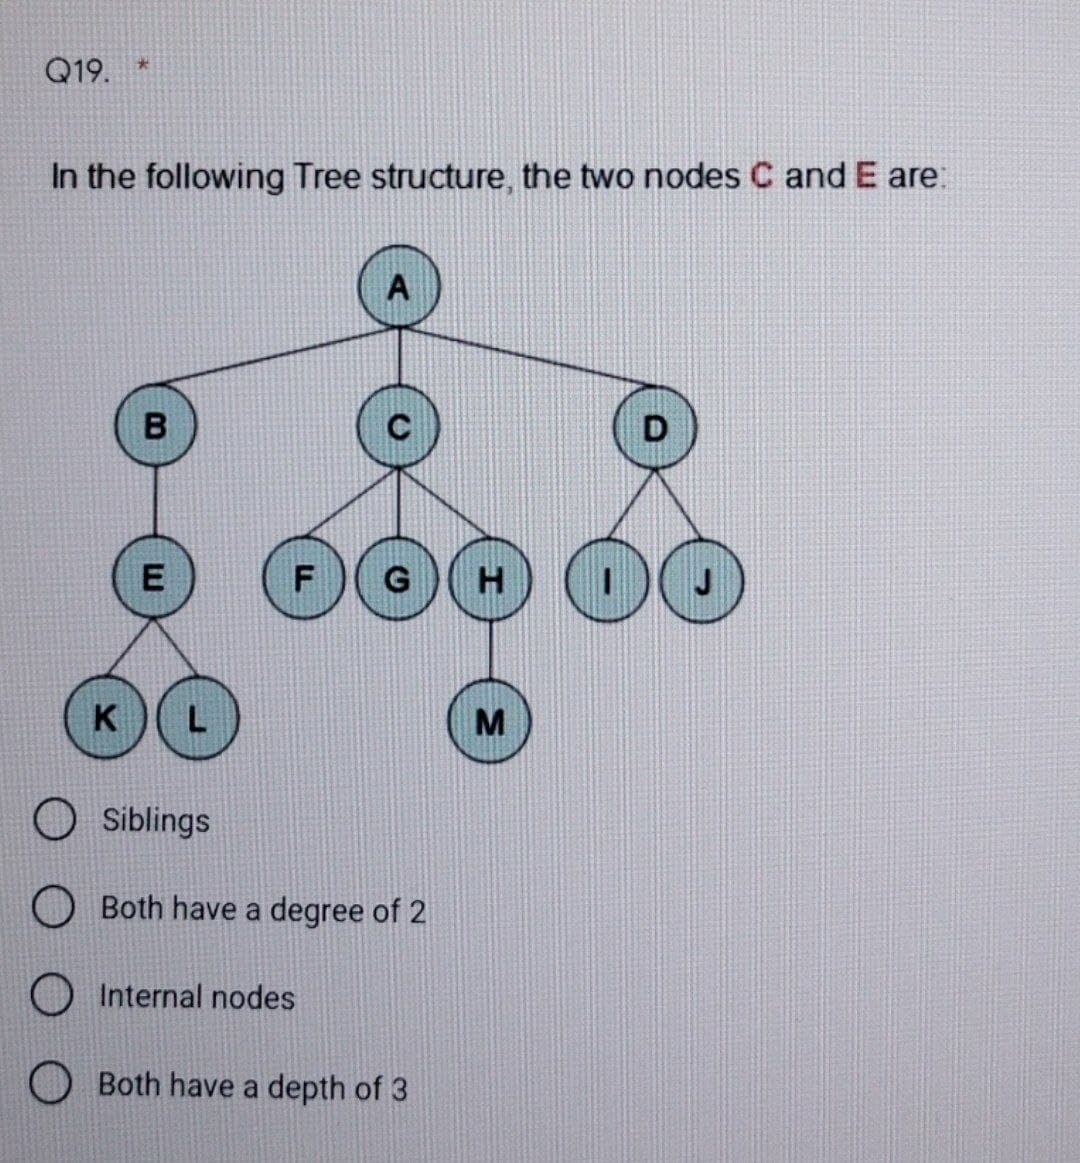 Q19.
*
In the following Tree structure, the two nodes C and E are:
K
B
E
F
A
Siblings
Both have a degree of 2
Internal nodes
Both have a depth of 3
H
M
D
OO